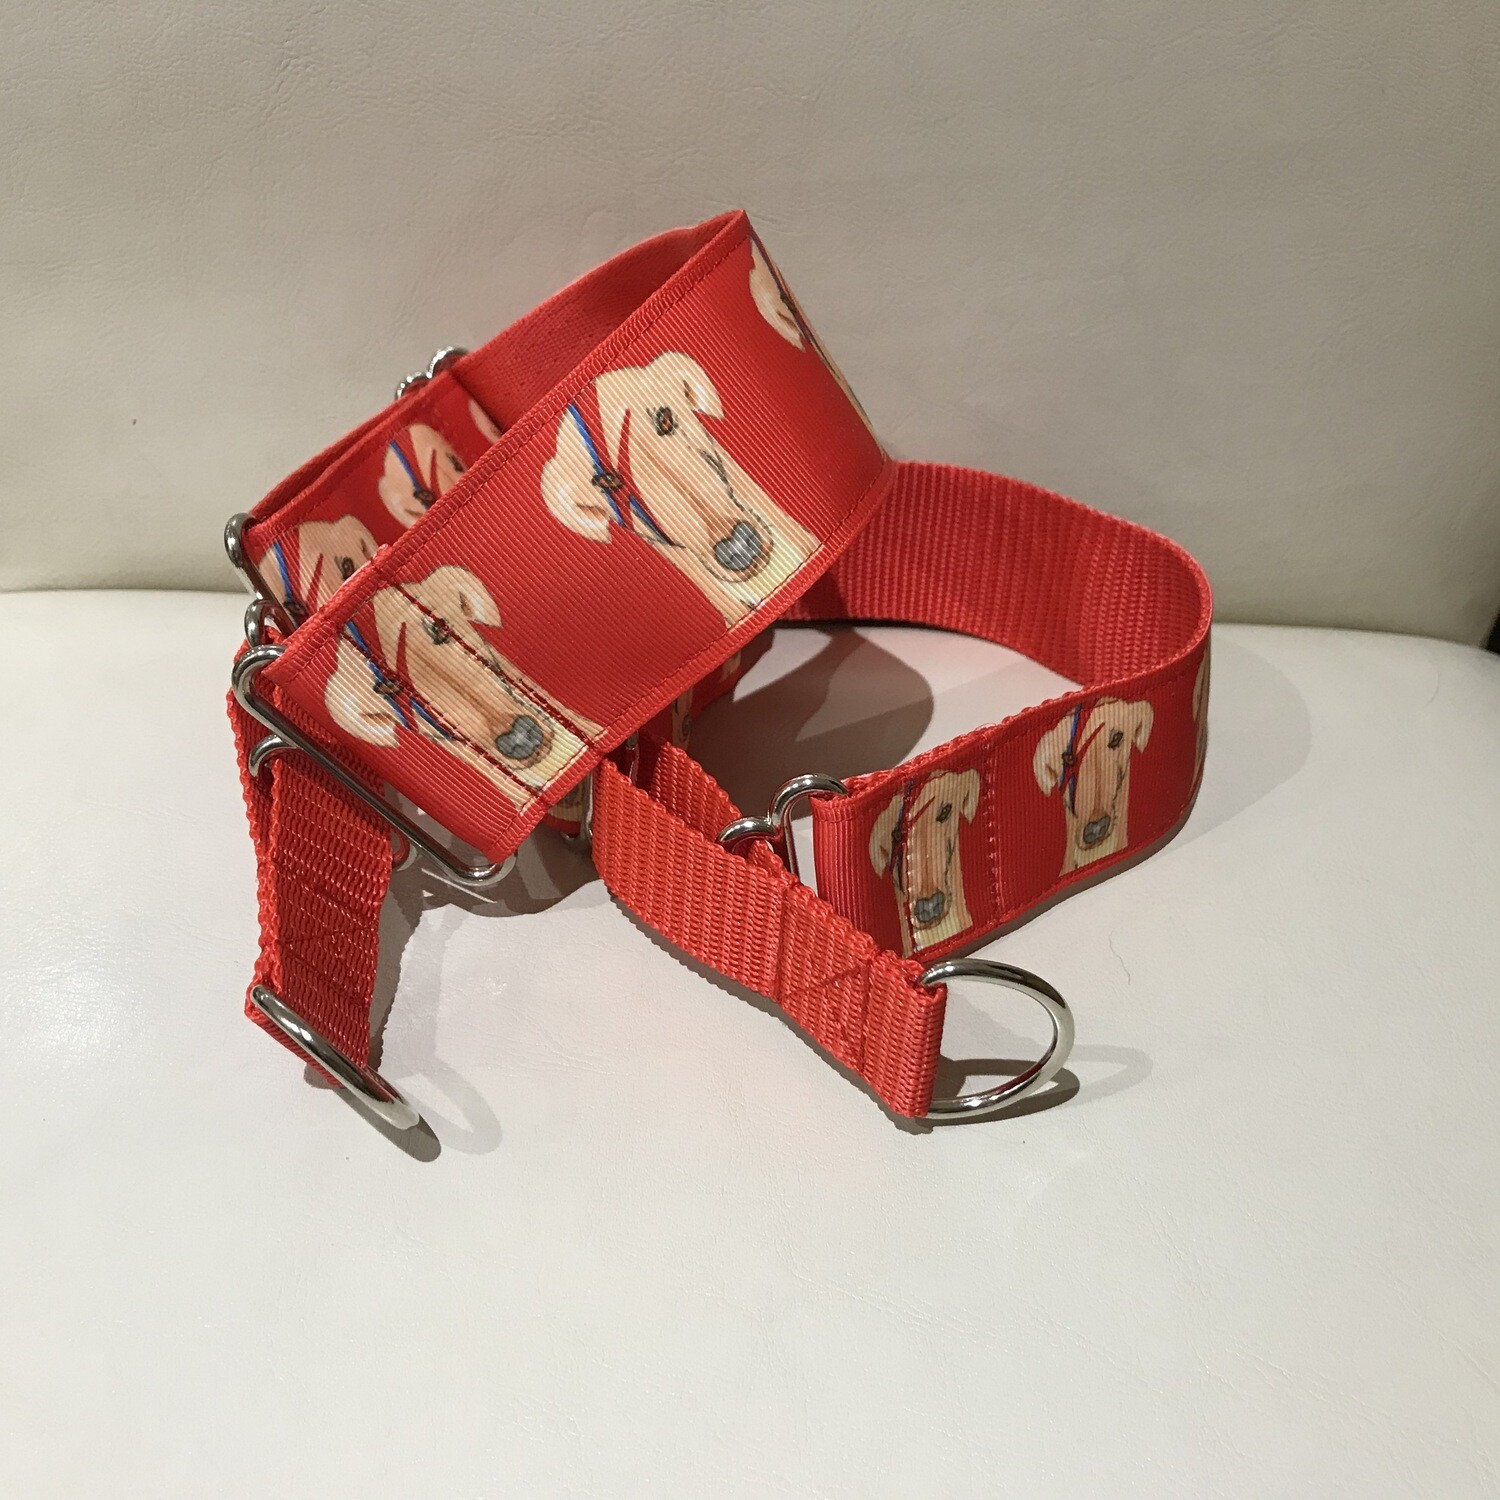 LPDC - Ziggy Stardog on Grosgrain Ribbon - Unique Collars designed by me!!